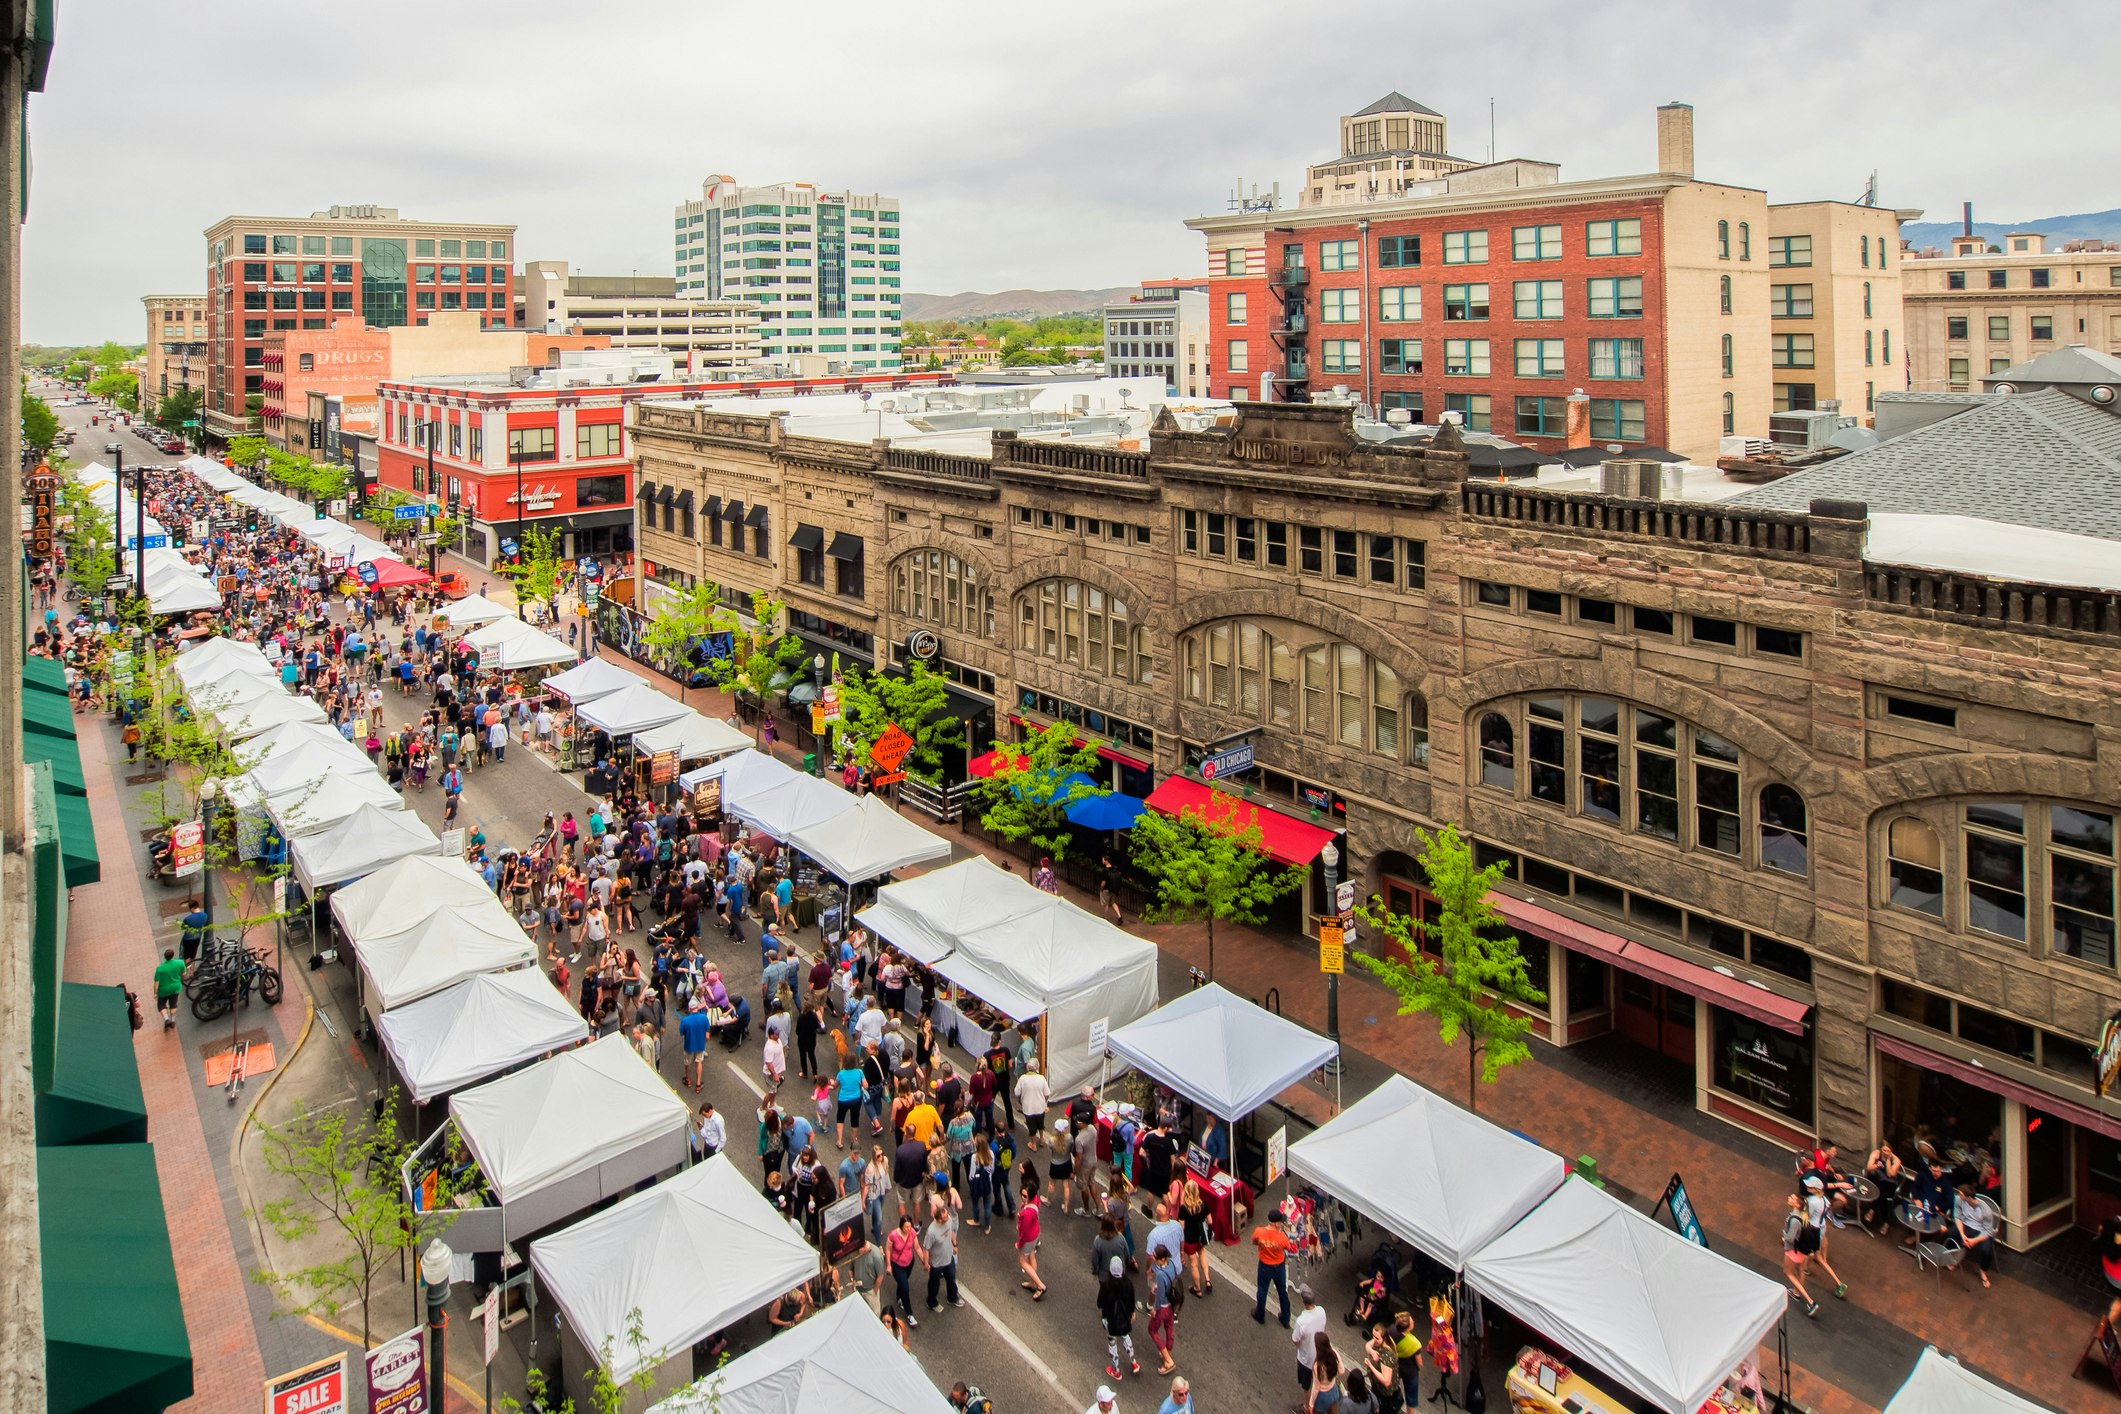 Bird's eye view of stalls and visitors along the street in the downtown area during Boise Farmers Market weekend in the late spring Getty Images